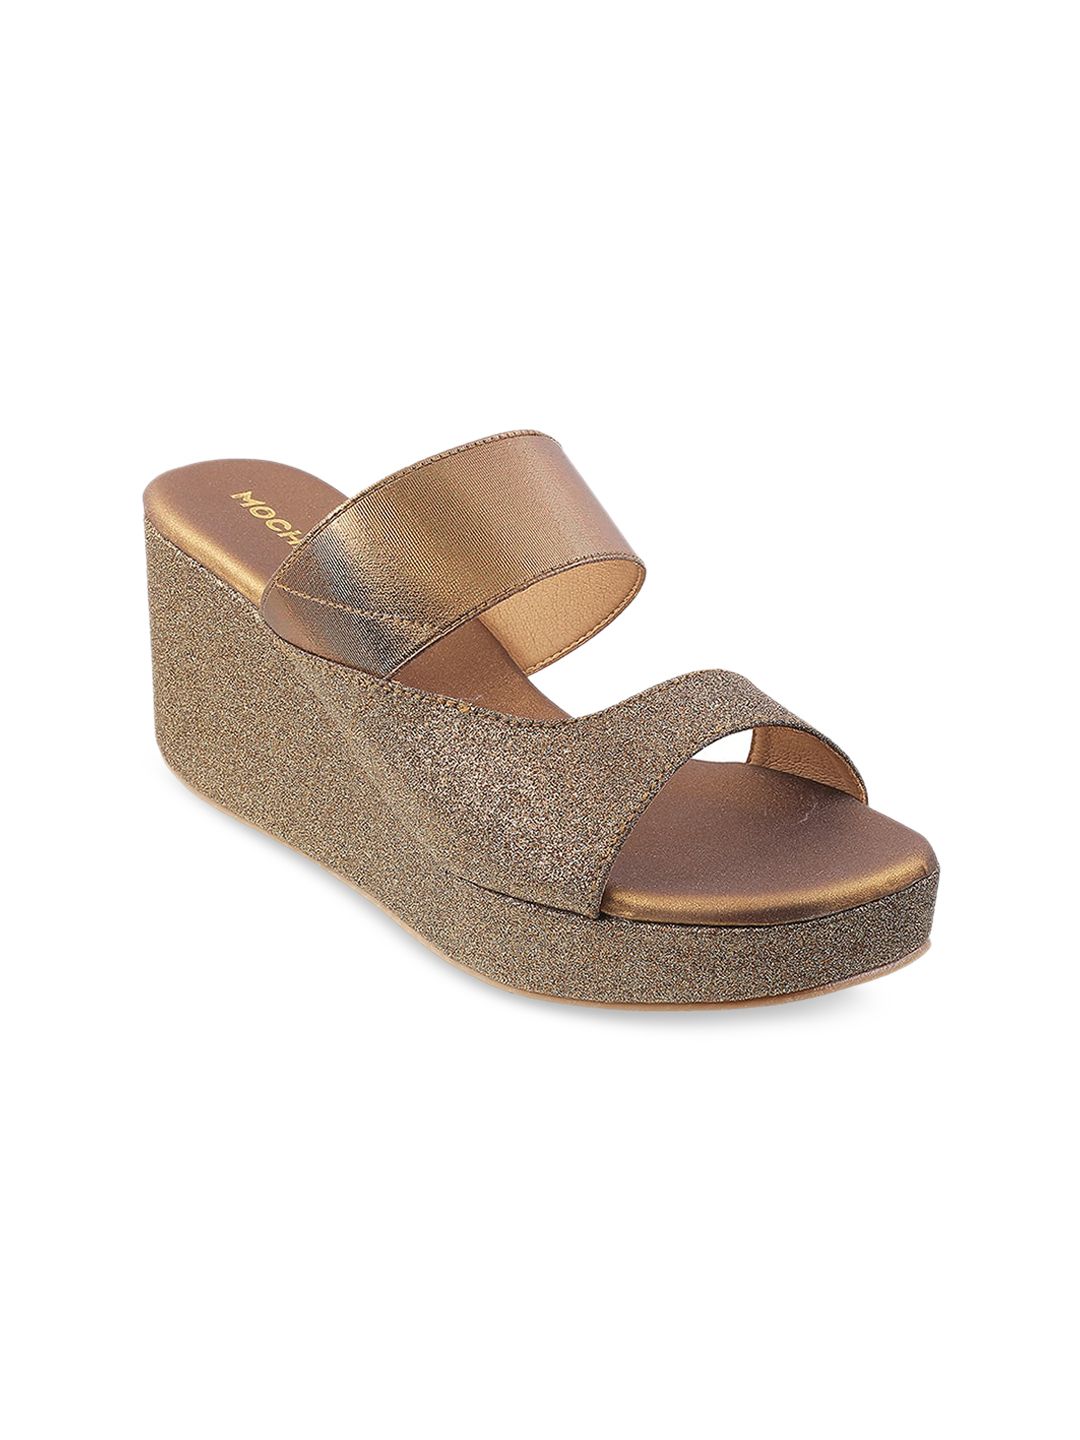 Mochi Gold-Toned Textured Wedge Sandals Price in India